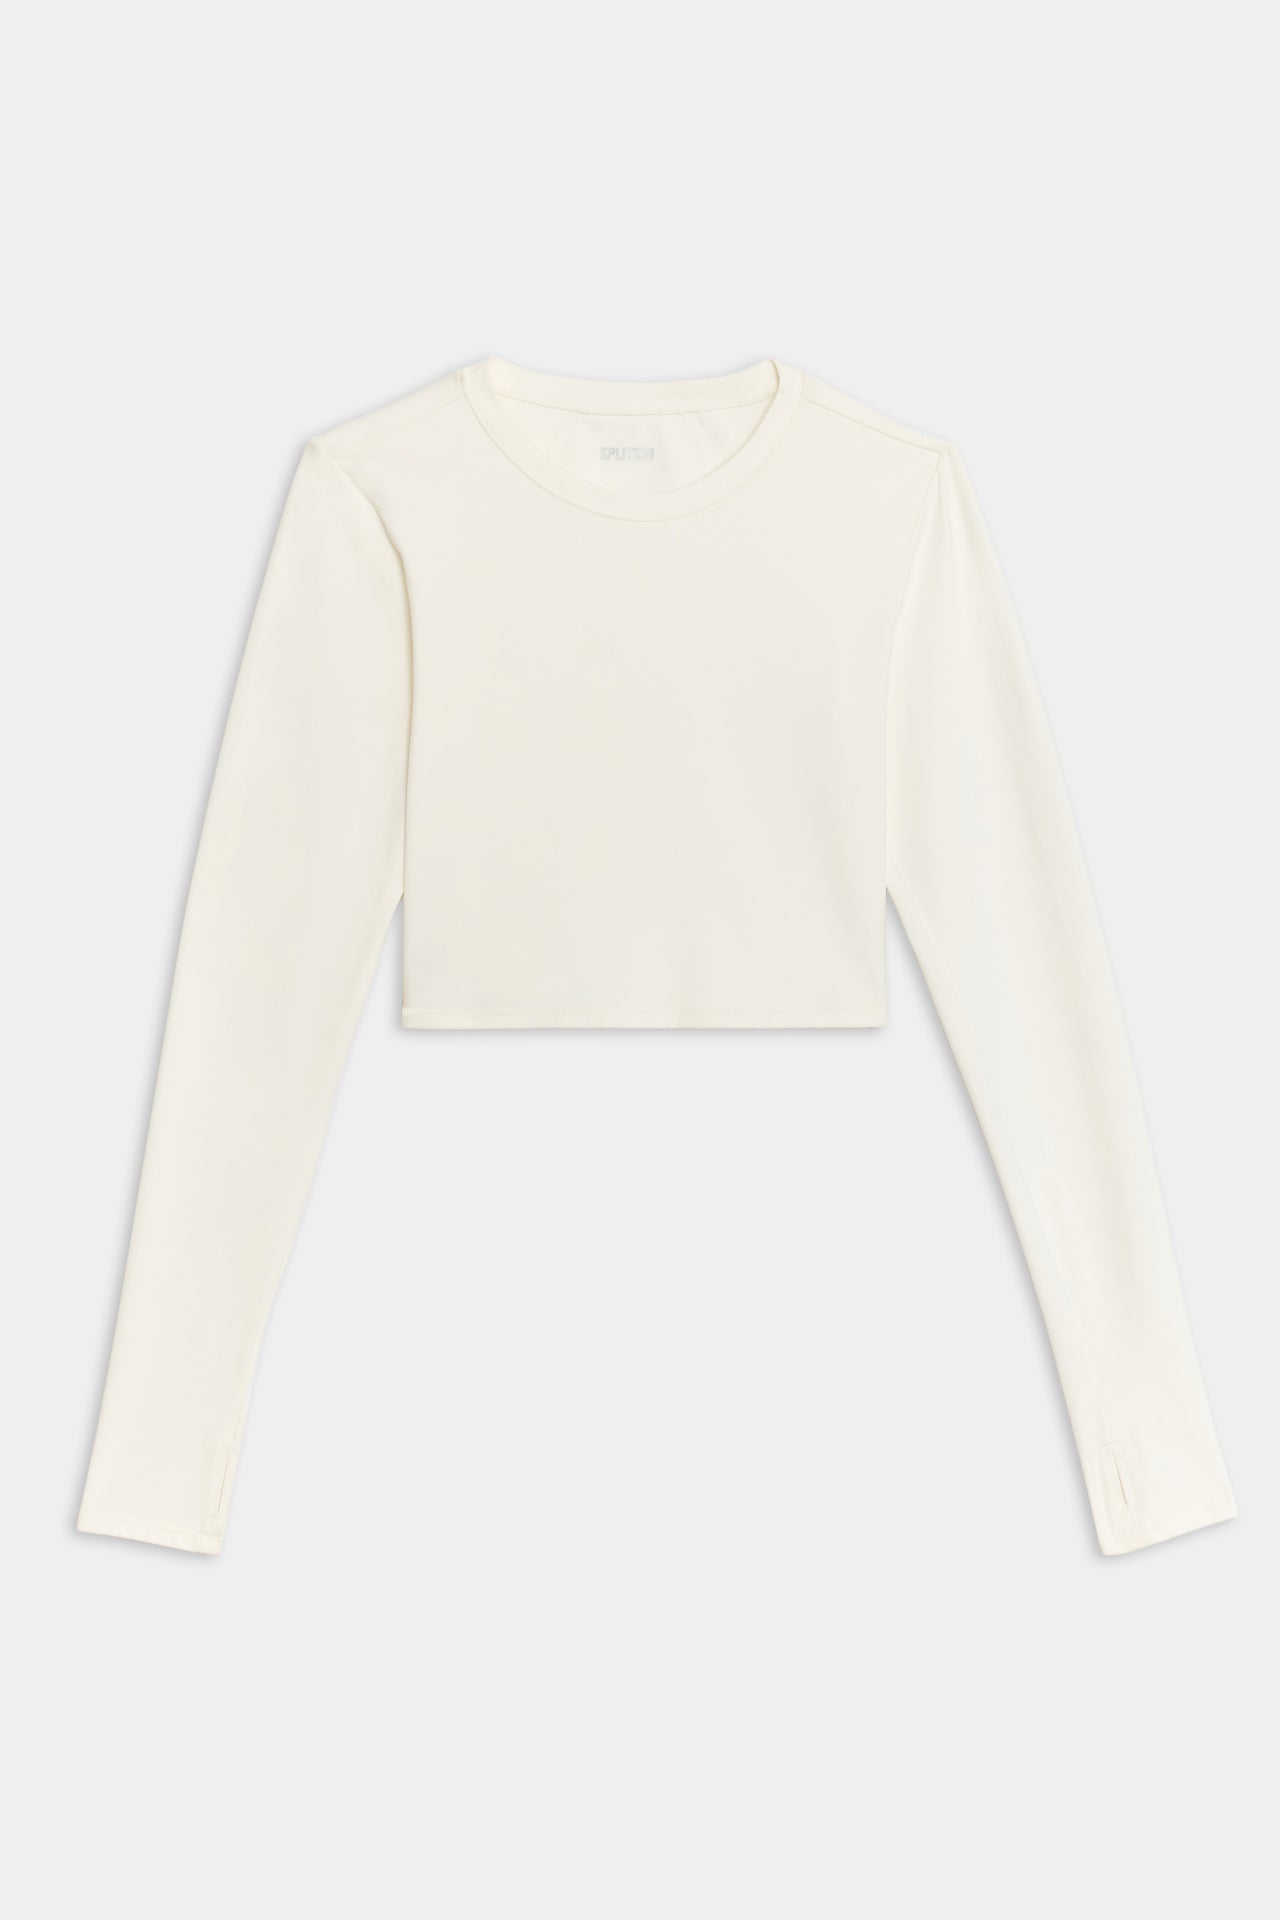 Flat view of white long sleeve crop top